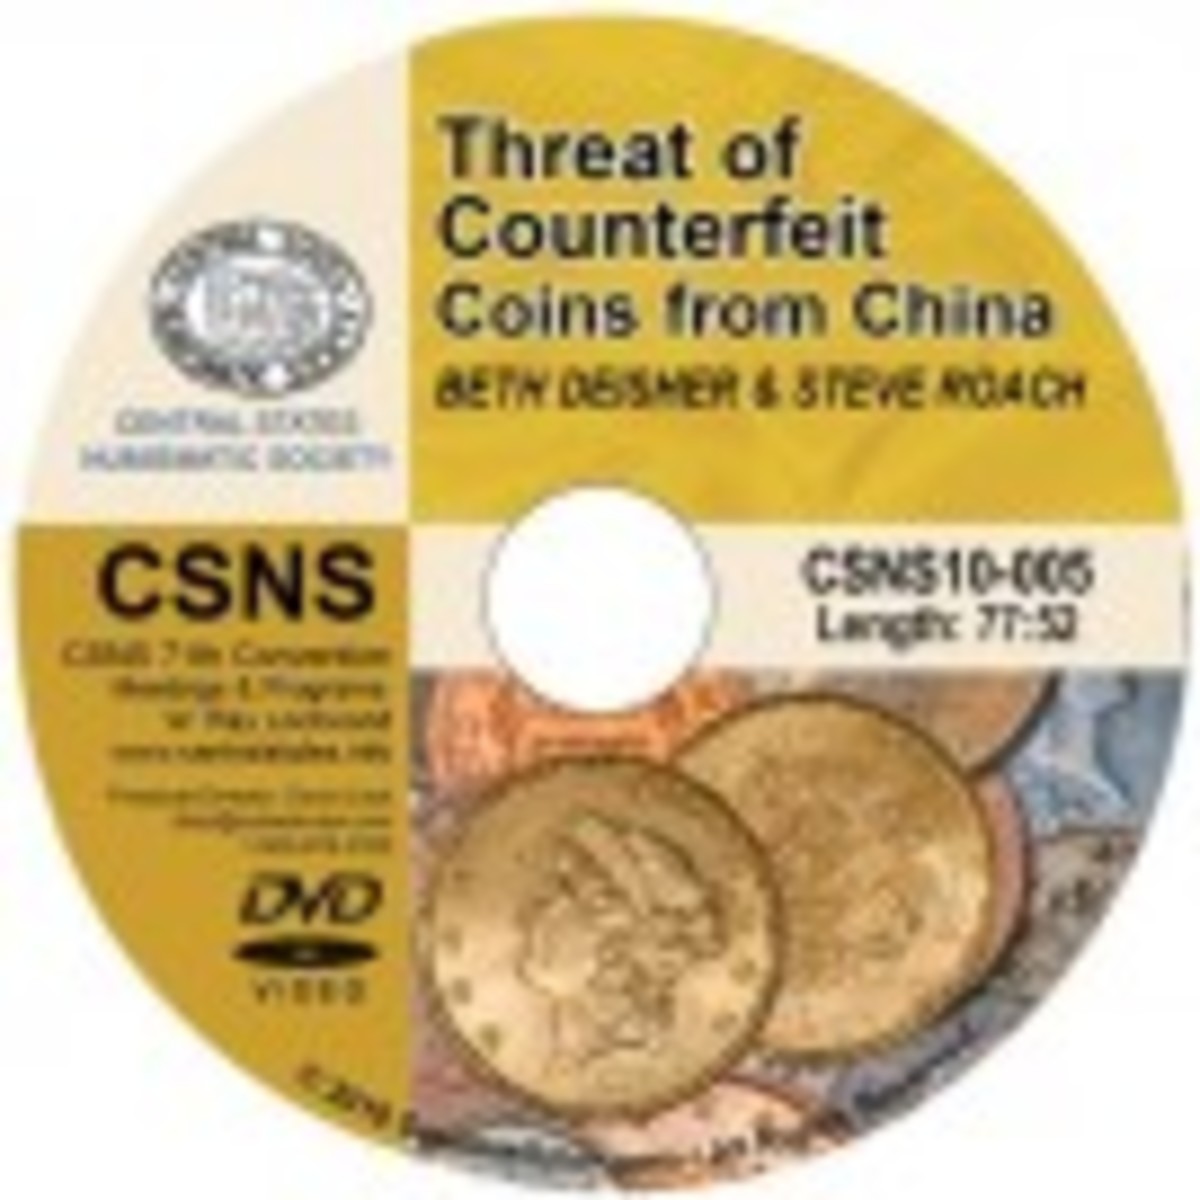 Threat of Counterfeit Coins from China